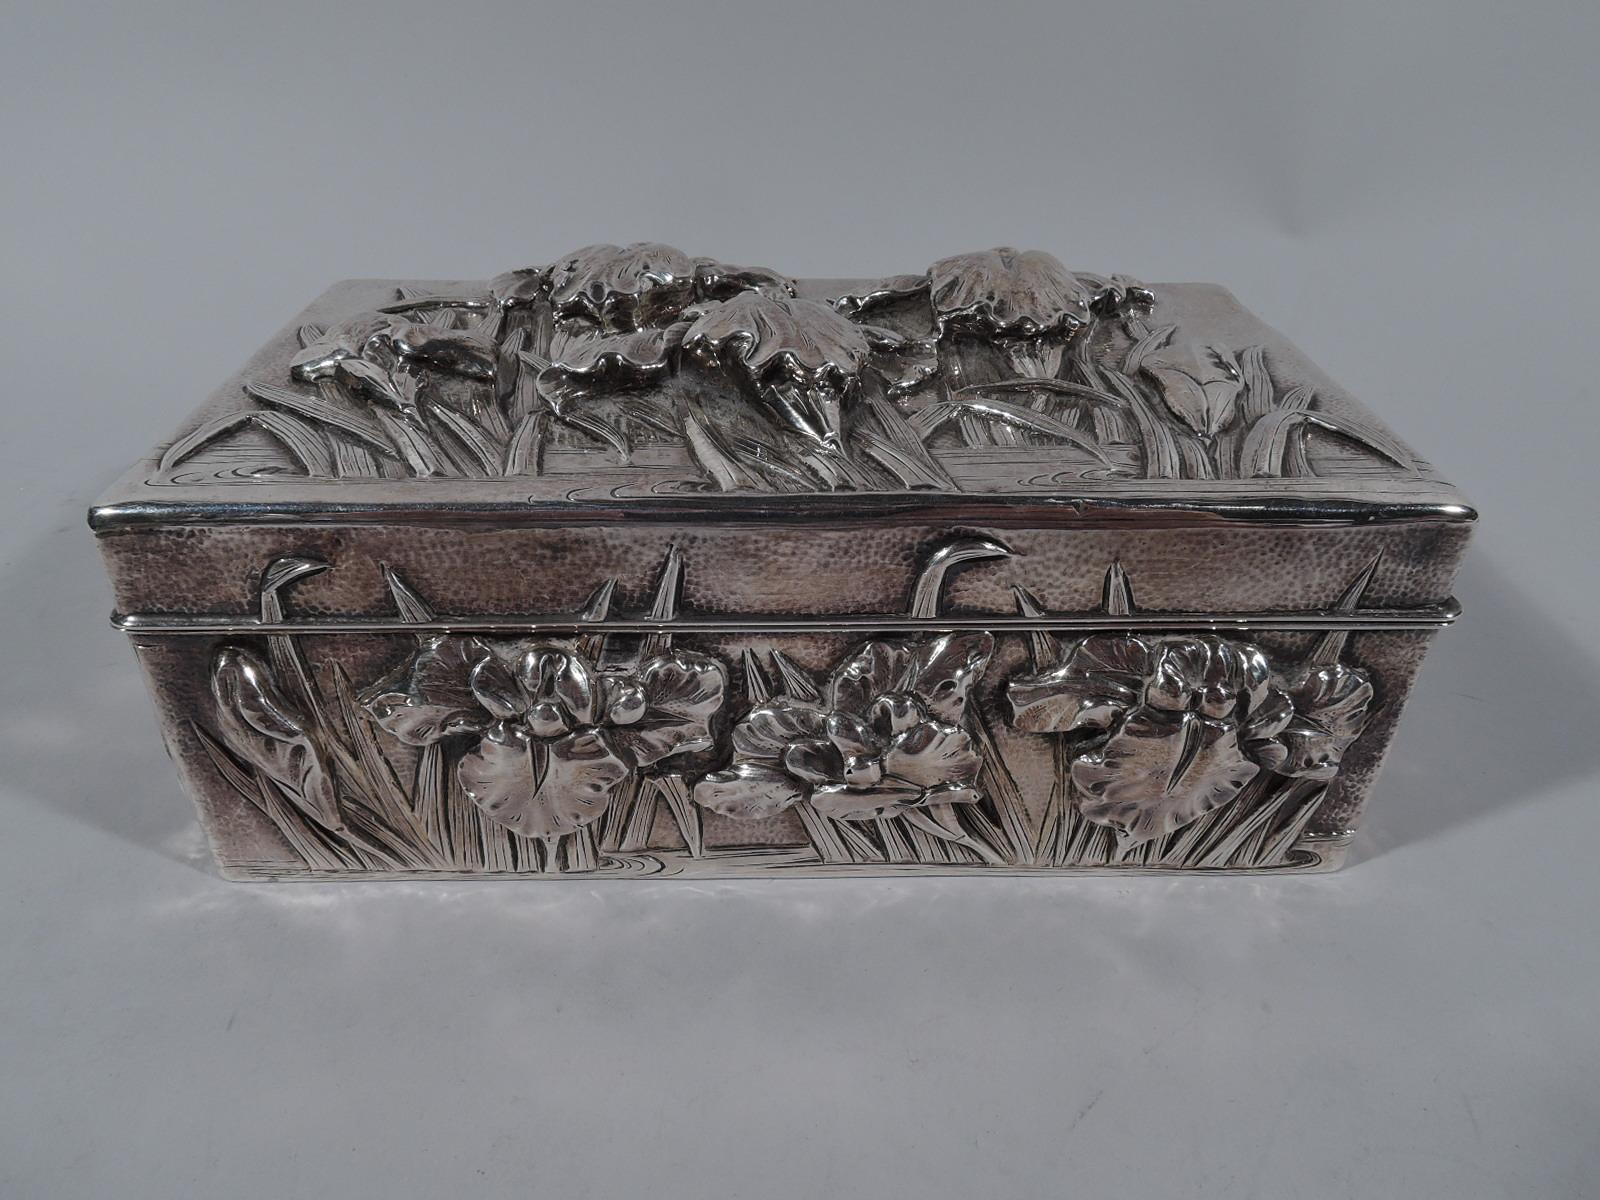 Turn-of-the-century Japanese silver box. Rectangular with hinged cover. Cover top and sides decorated with iris flowers set in eddying water. Ornament applied, chased, and engraved; ground hand hammered. Interior lined with stained wood; bottom